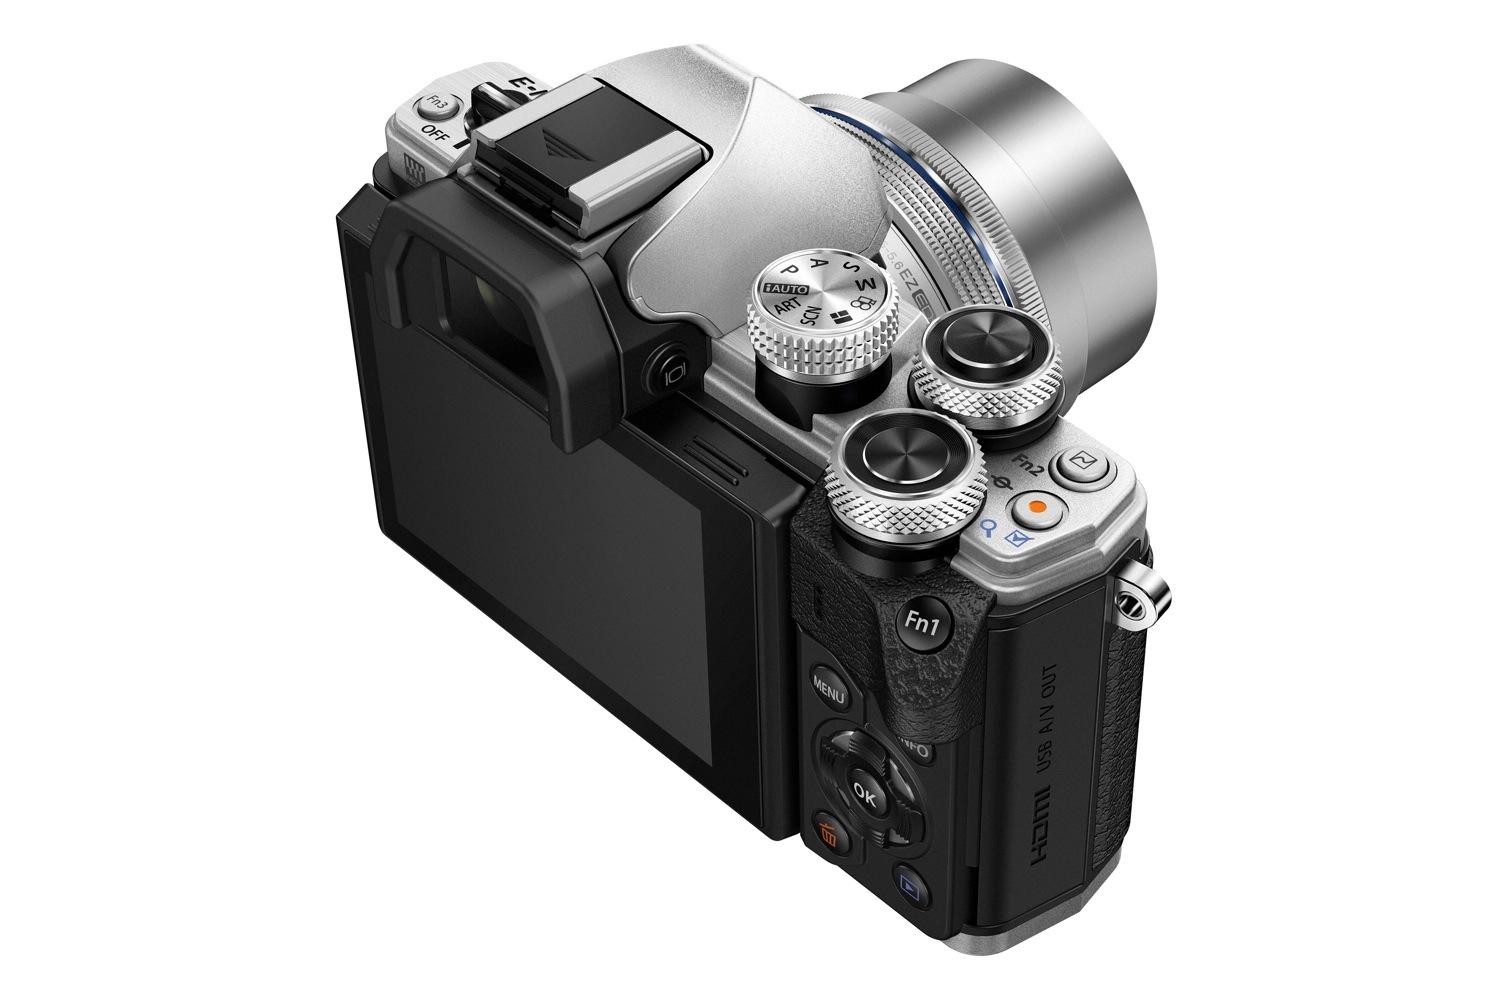 olympus gives entry level om d e m10 mirrorless camera big upgrades e10mkii 11